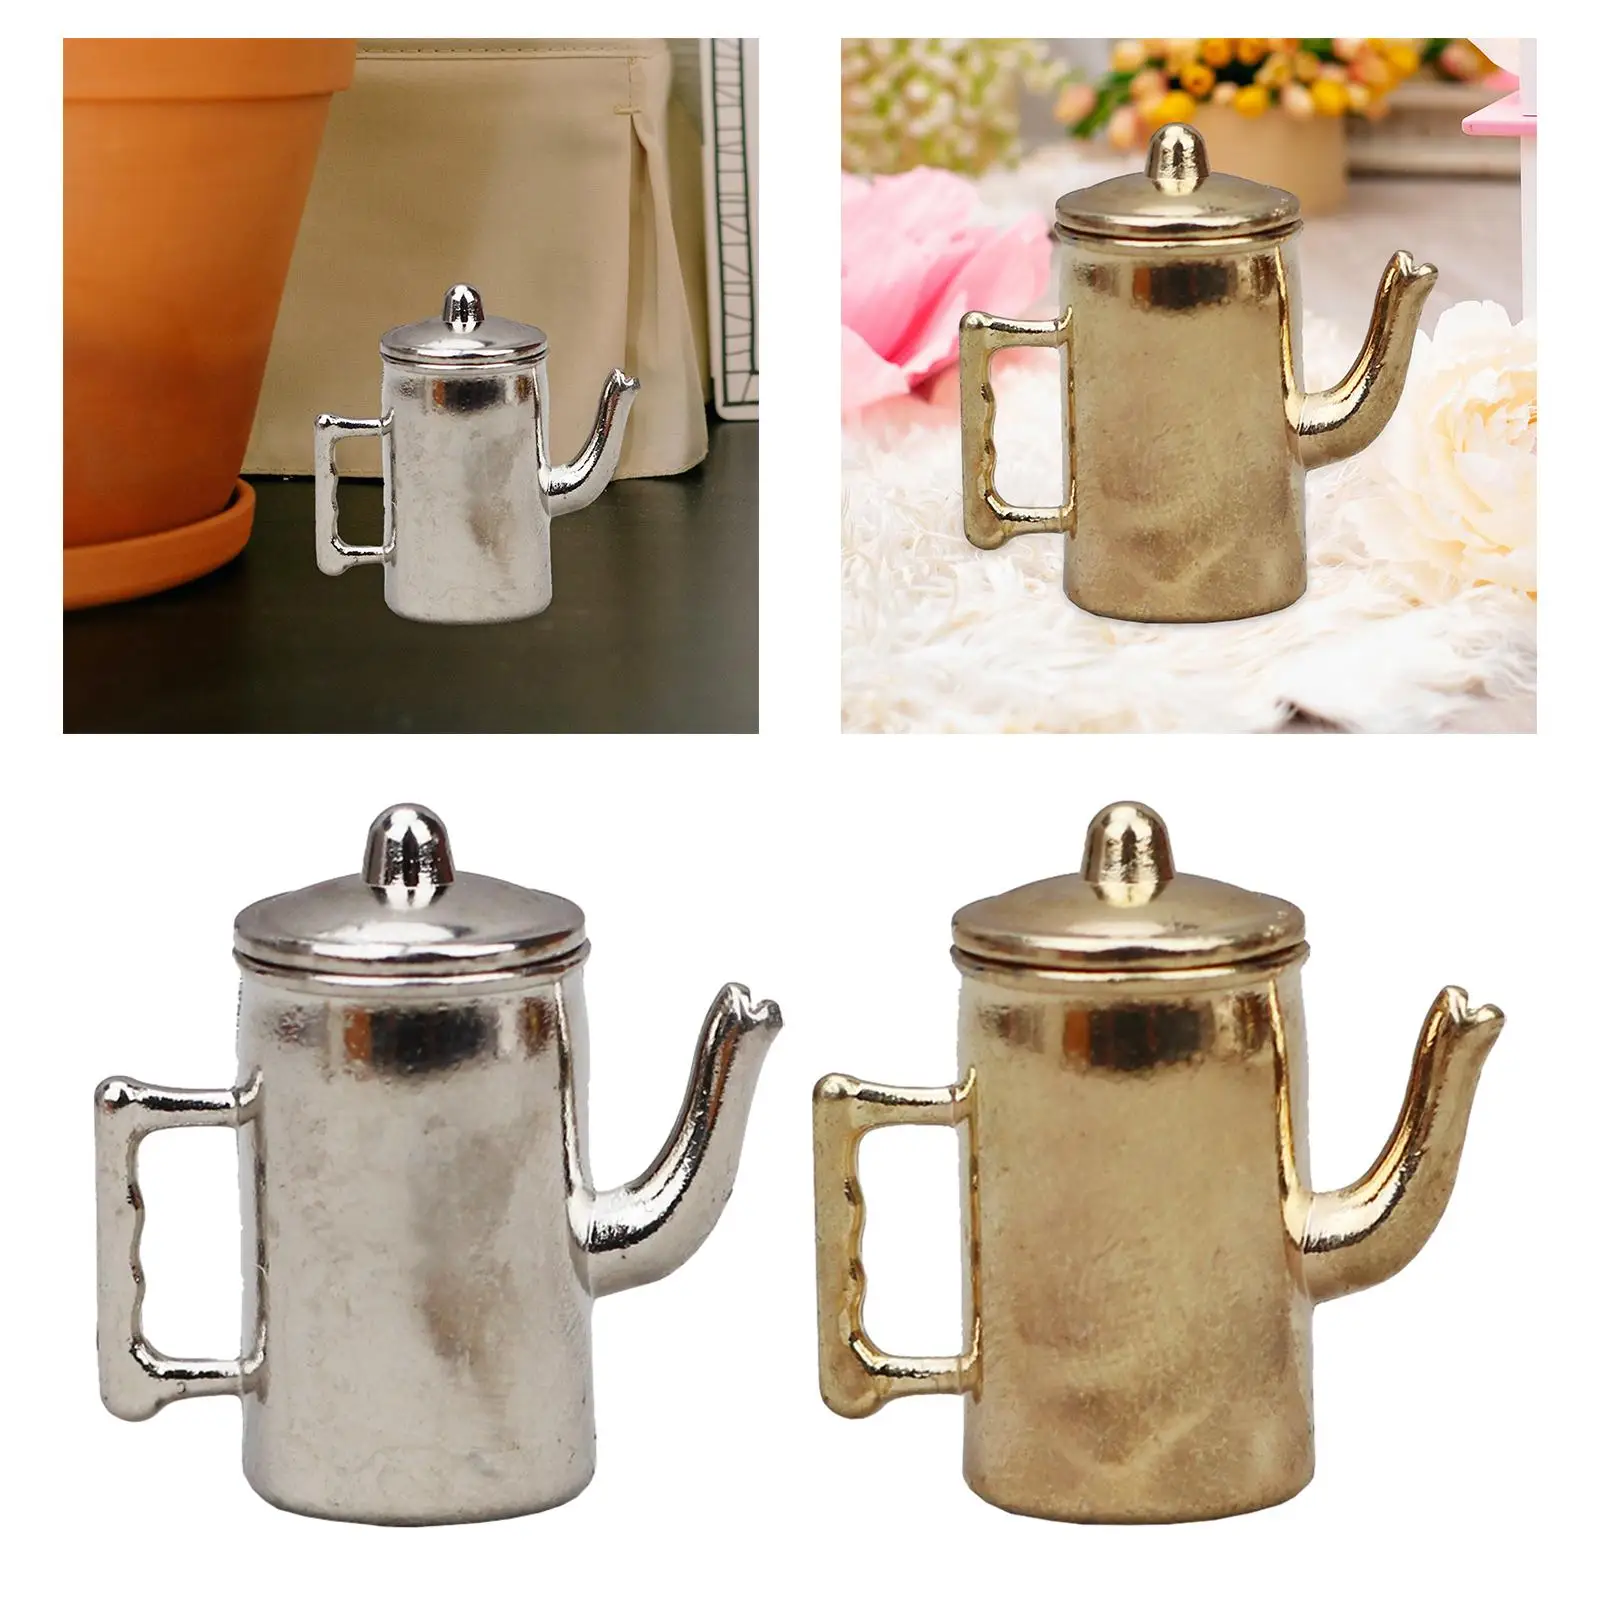 1:12 Dollhouse Miniature Water Pitcher for Decoration Sand Table DIY Scenery